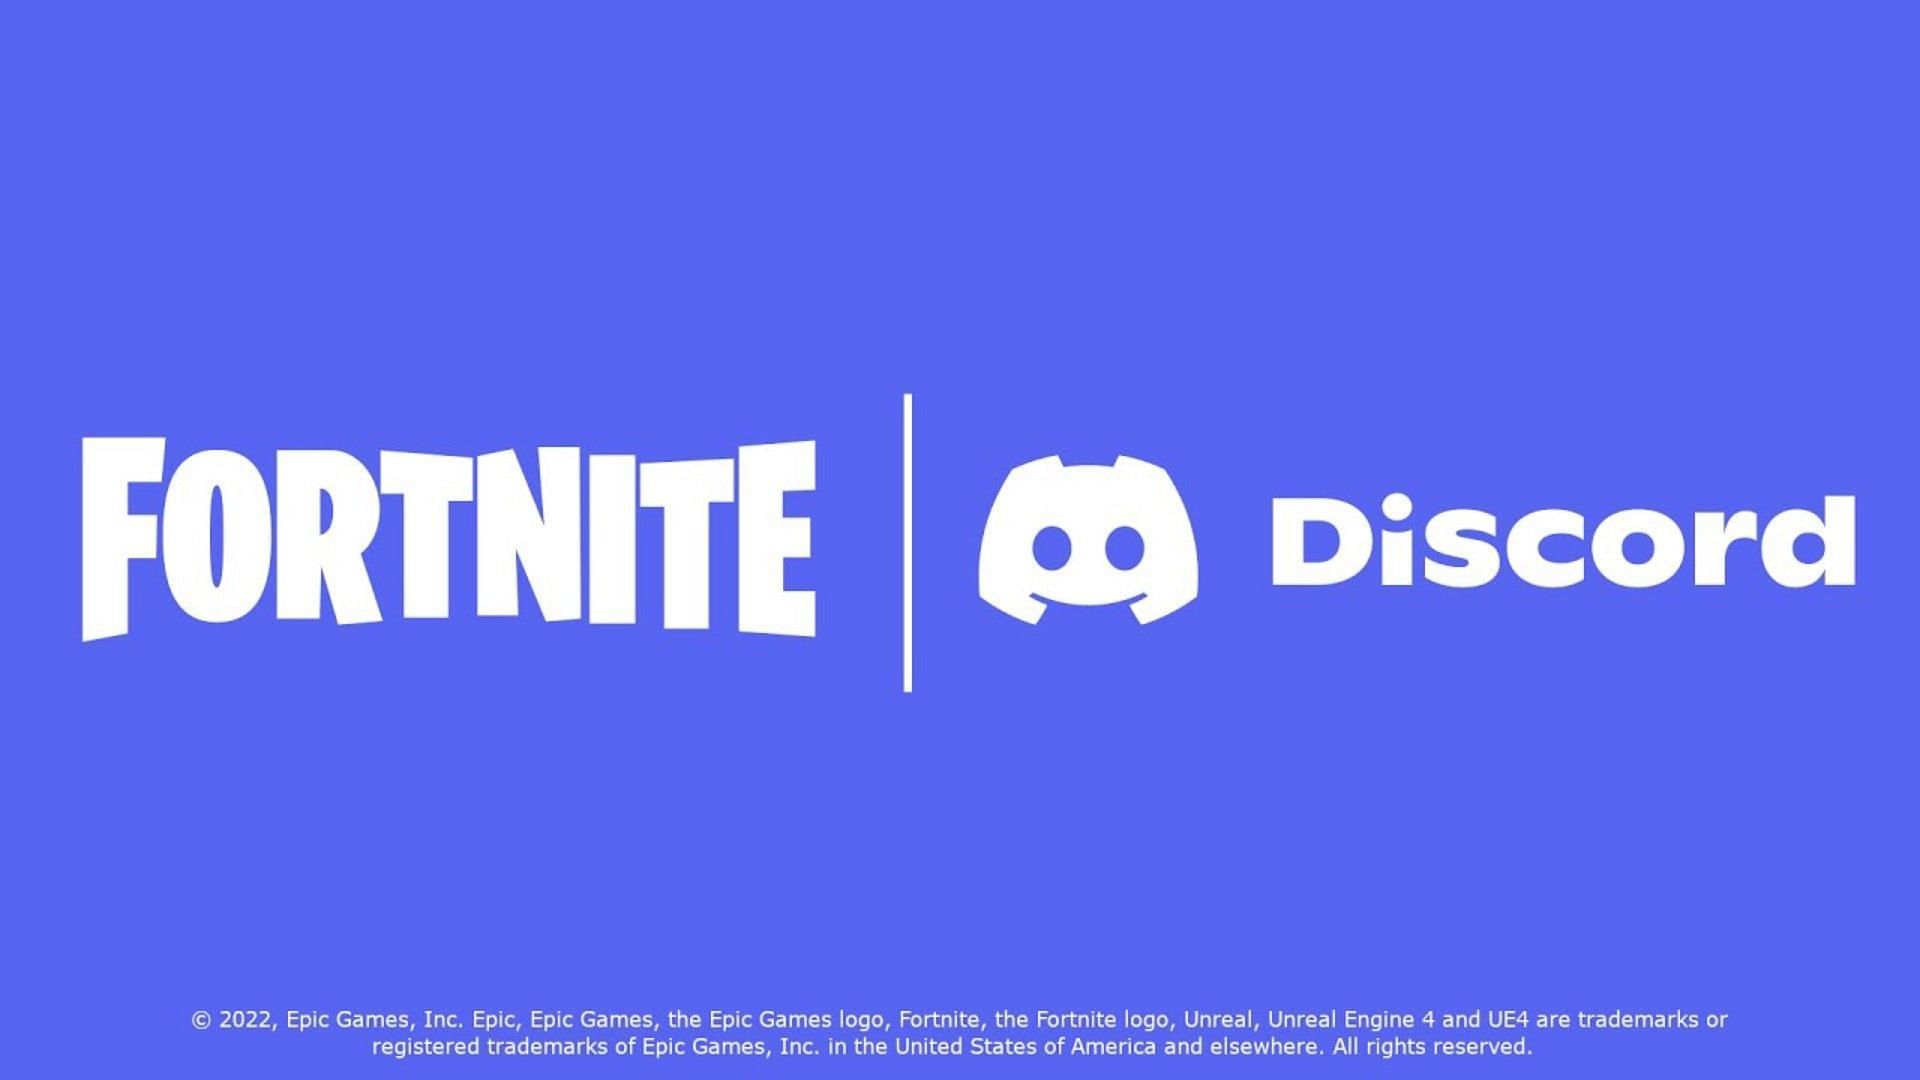 Fortnite is all set to collaborate with Discord. (Image via Epic Games)